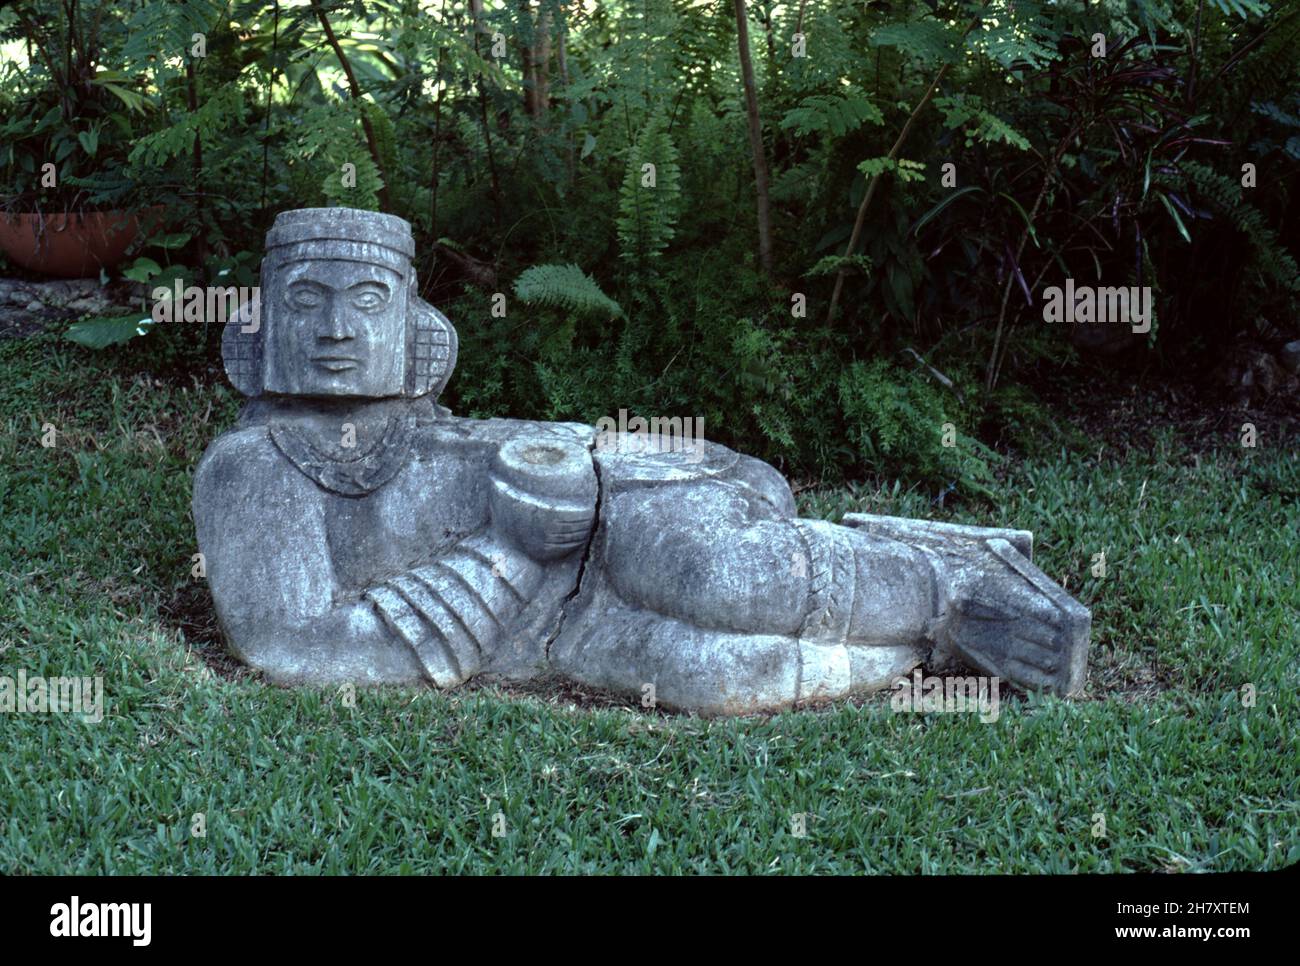 Uxmal Mexico. 12/27/1985. Choc Mool (Chocmool). Pre-Columbian Mesoamerican stone sculpture. A reclining figure with its head facing 90 degrees from the front, supporting itself on its elbows and supporting a bowl or a disk upon its stomach.  Believed to be associated with sacrificial stones or thrones. Stock Photo